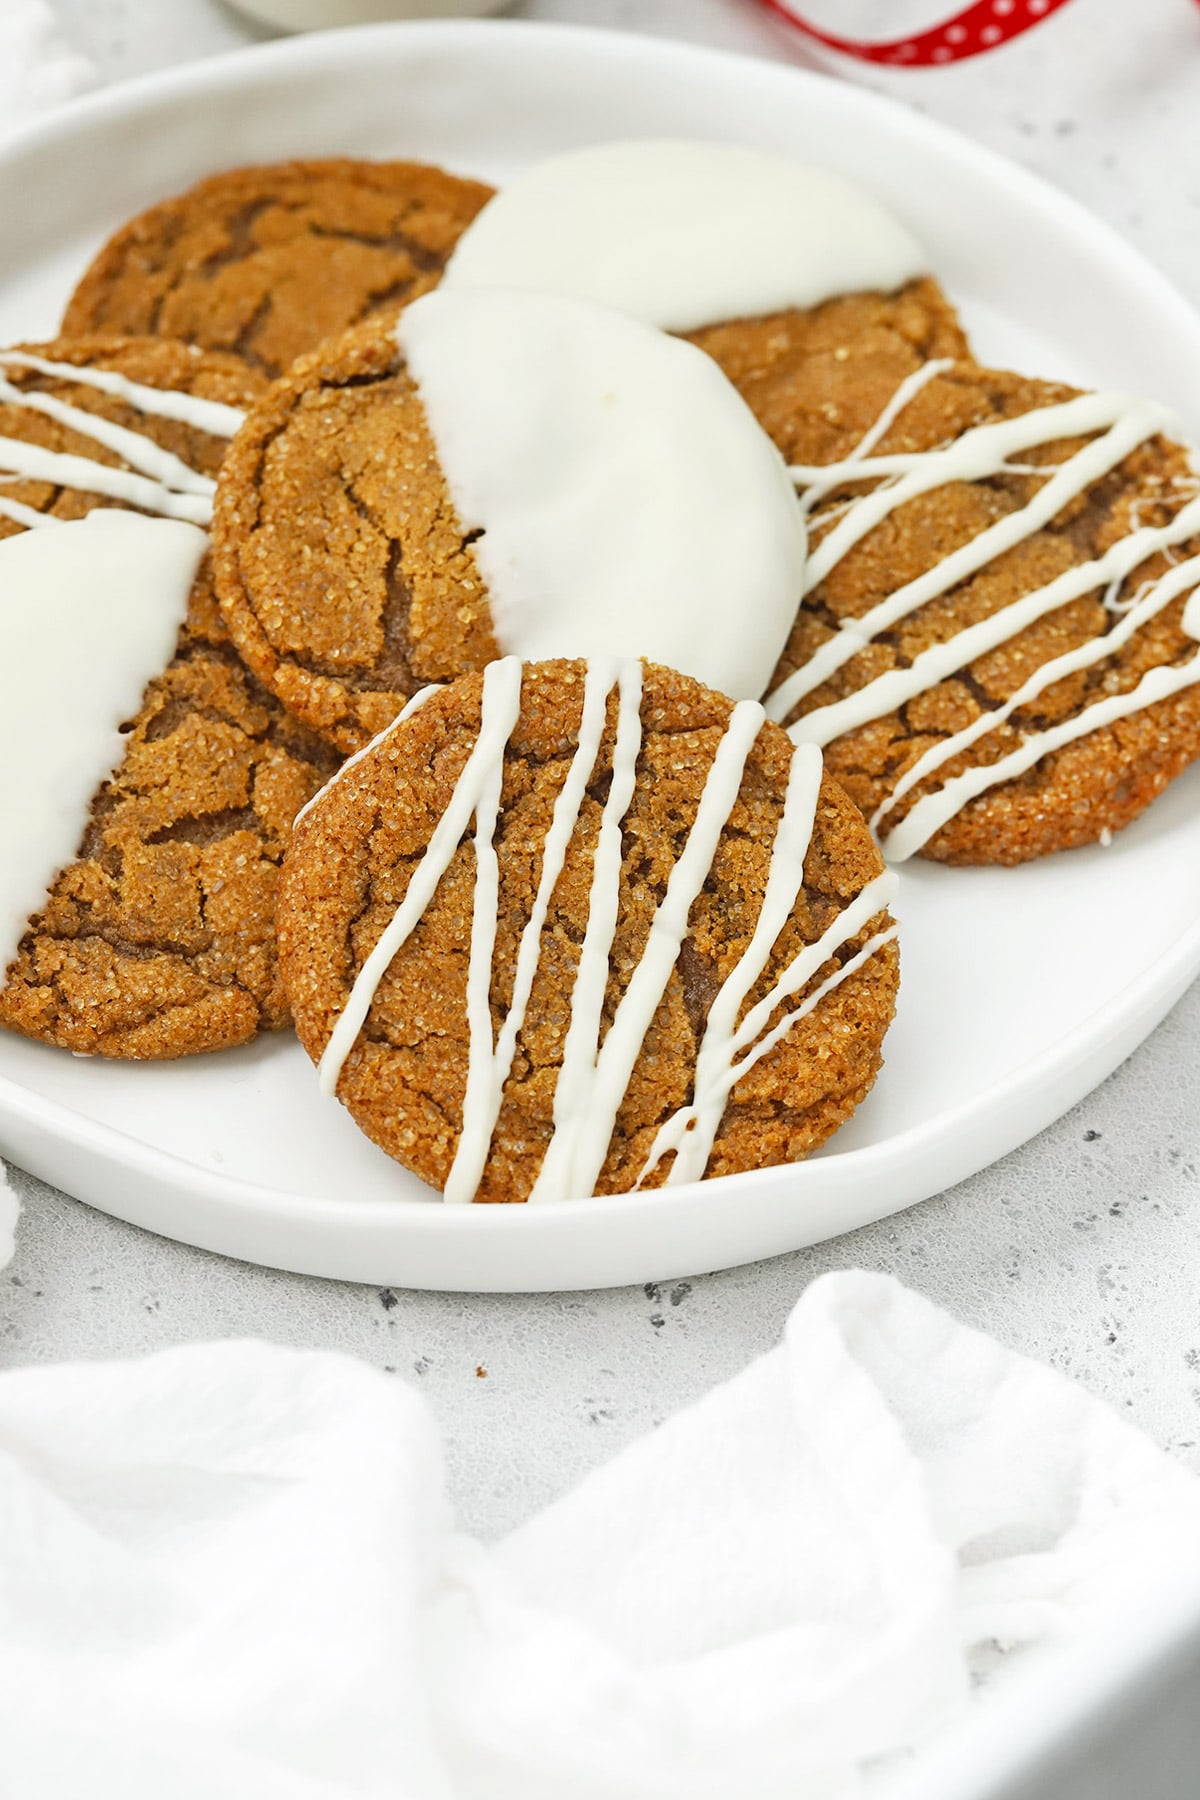 Front view of soft, chewy gluten-free ginger cookies drizzled and dipped in white chocolate